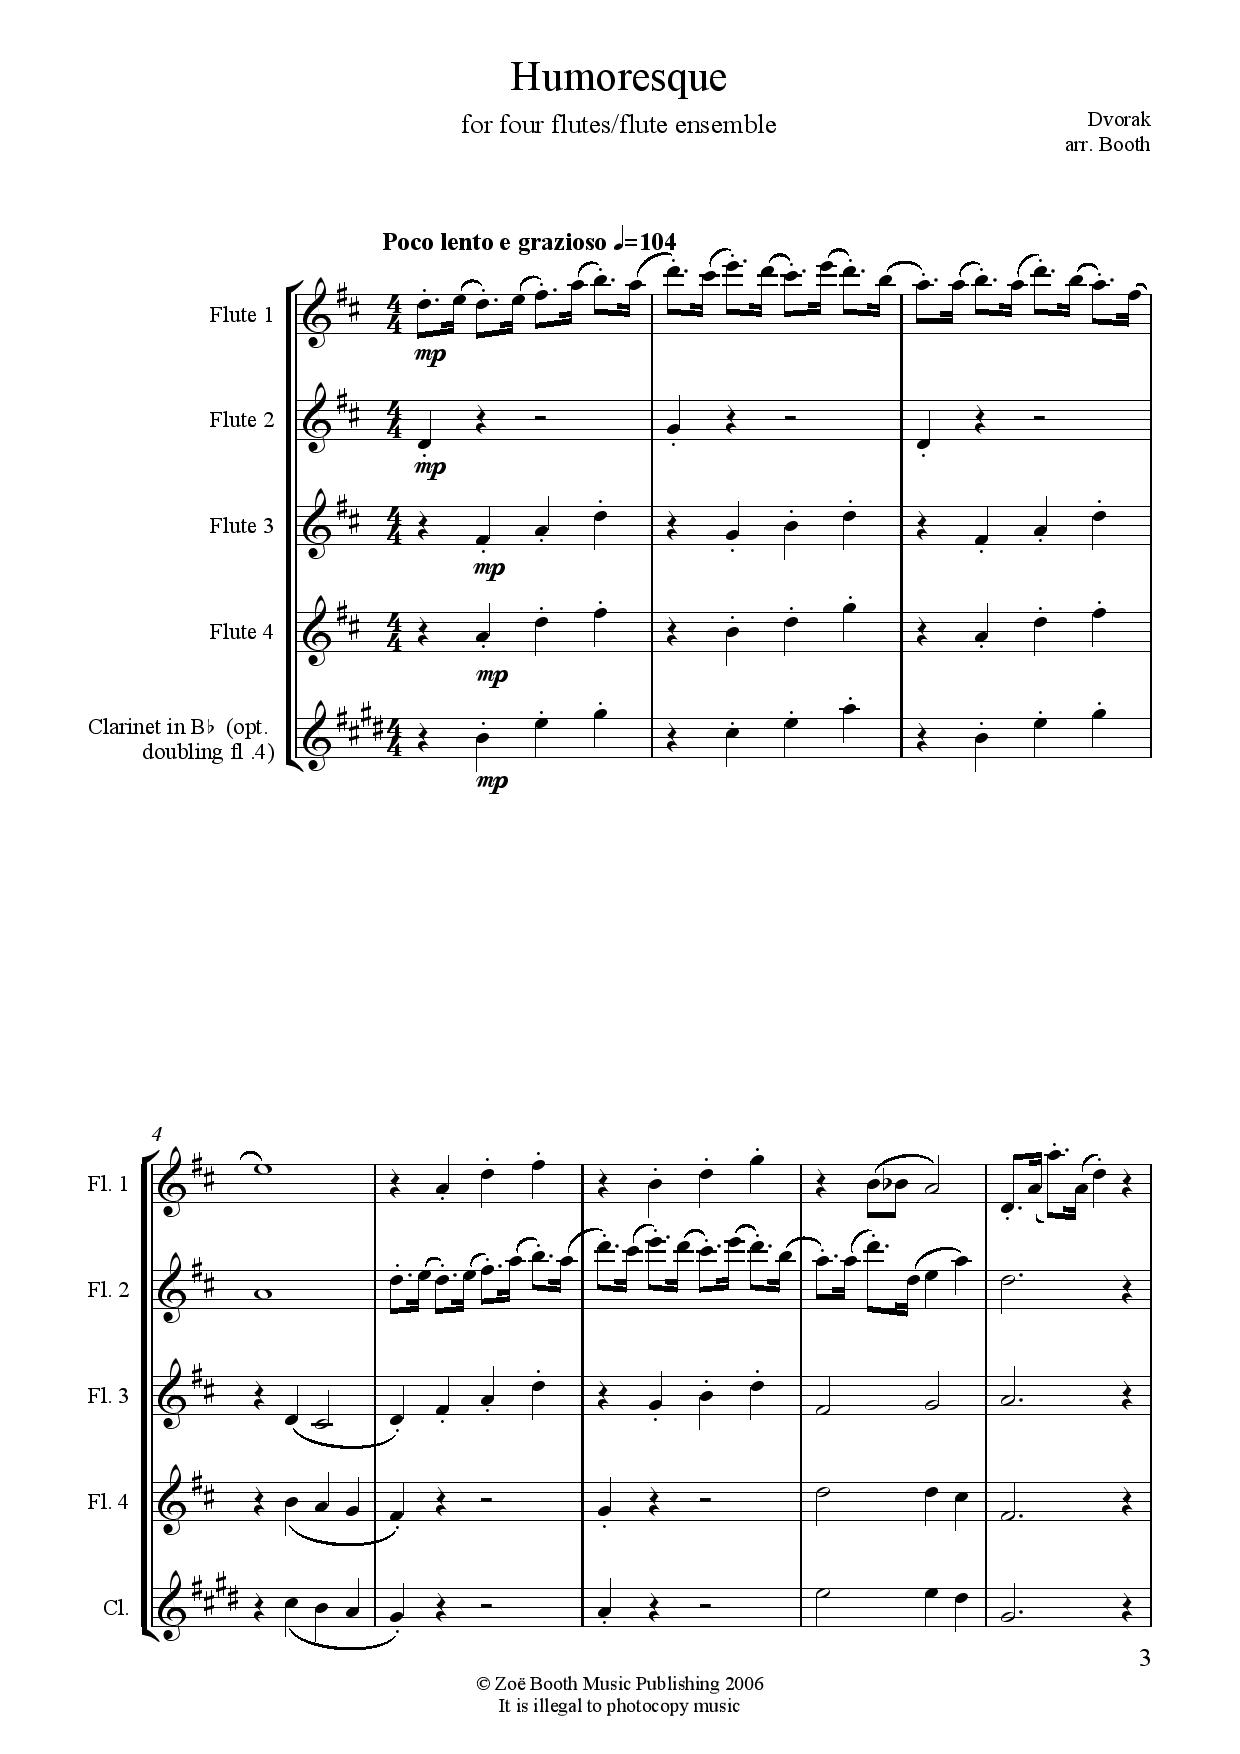 Humoresque by Dvorak,  arranged by Zoë Booth for four or more flutes/flute choir